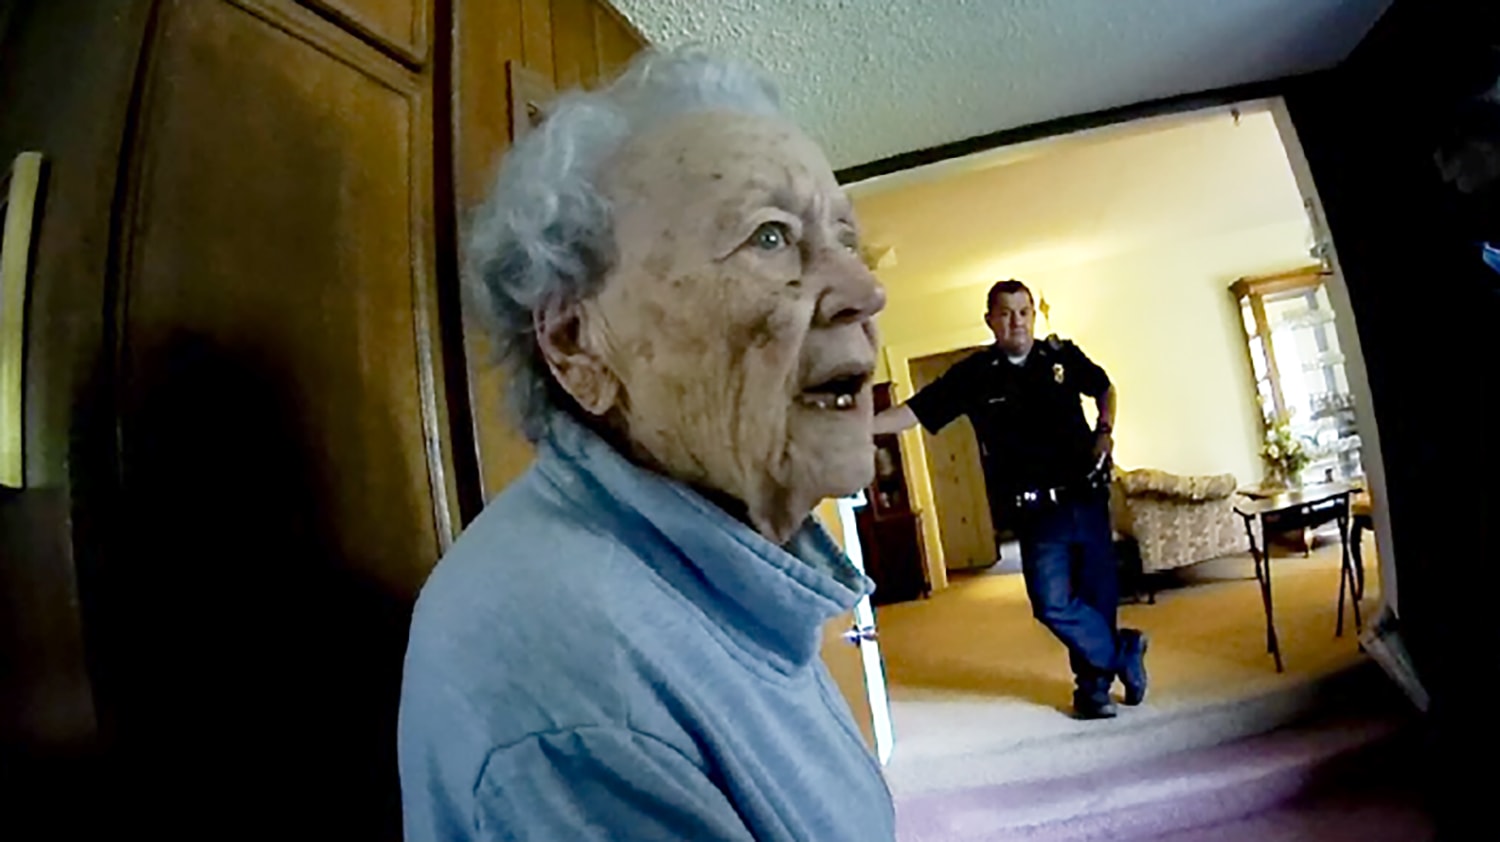 Joan Meyer, the 98-year-old co-owner of the Marion County Record, was defiant as police Chief Gideon Cody, seen the background, and other officers raided her home. She died the following day.